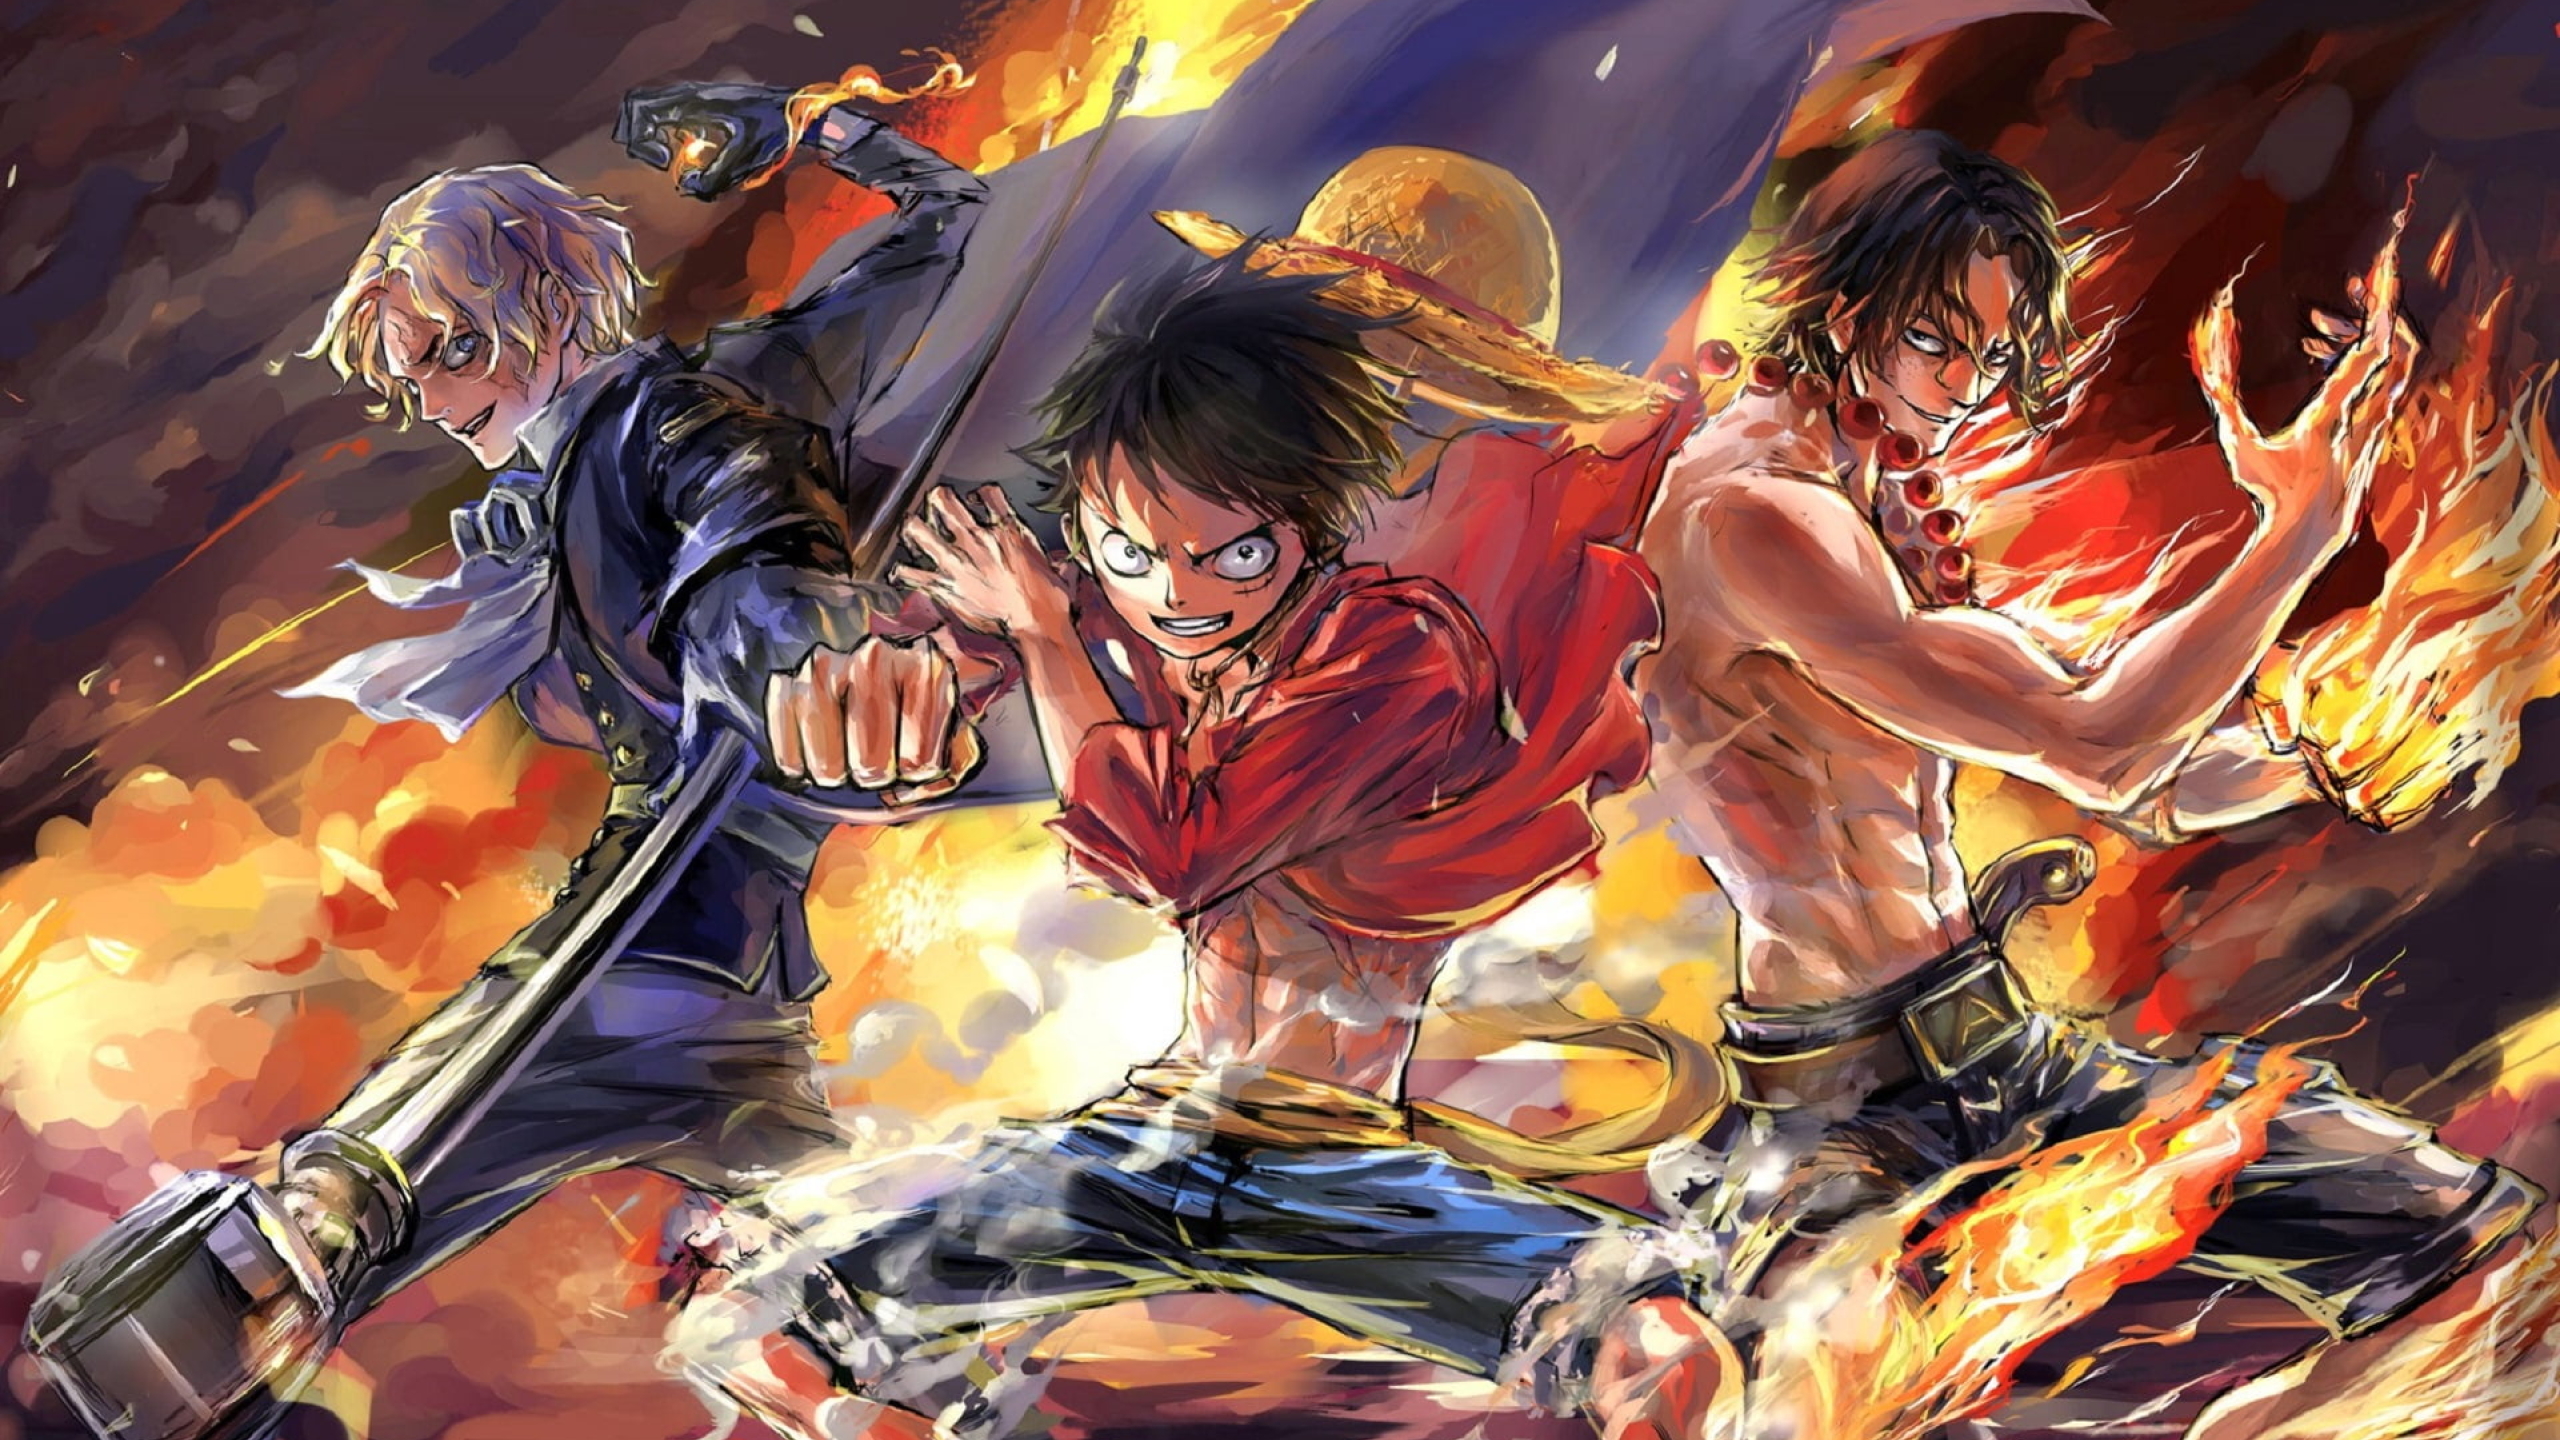 2560x1440 Luffy Ace And Sabo One Piece Team 1440p Resolution Wallpaper Hd Anime 4k Wallpapers Images Photos And Background Wallpapers Den